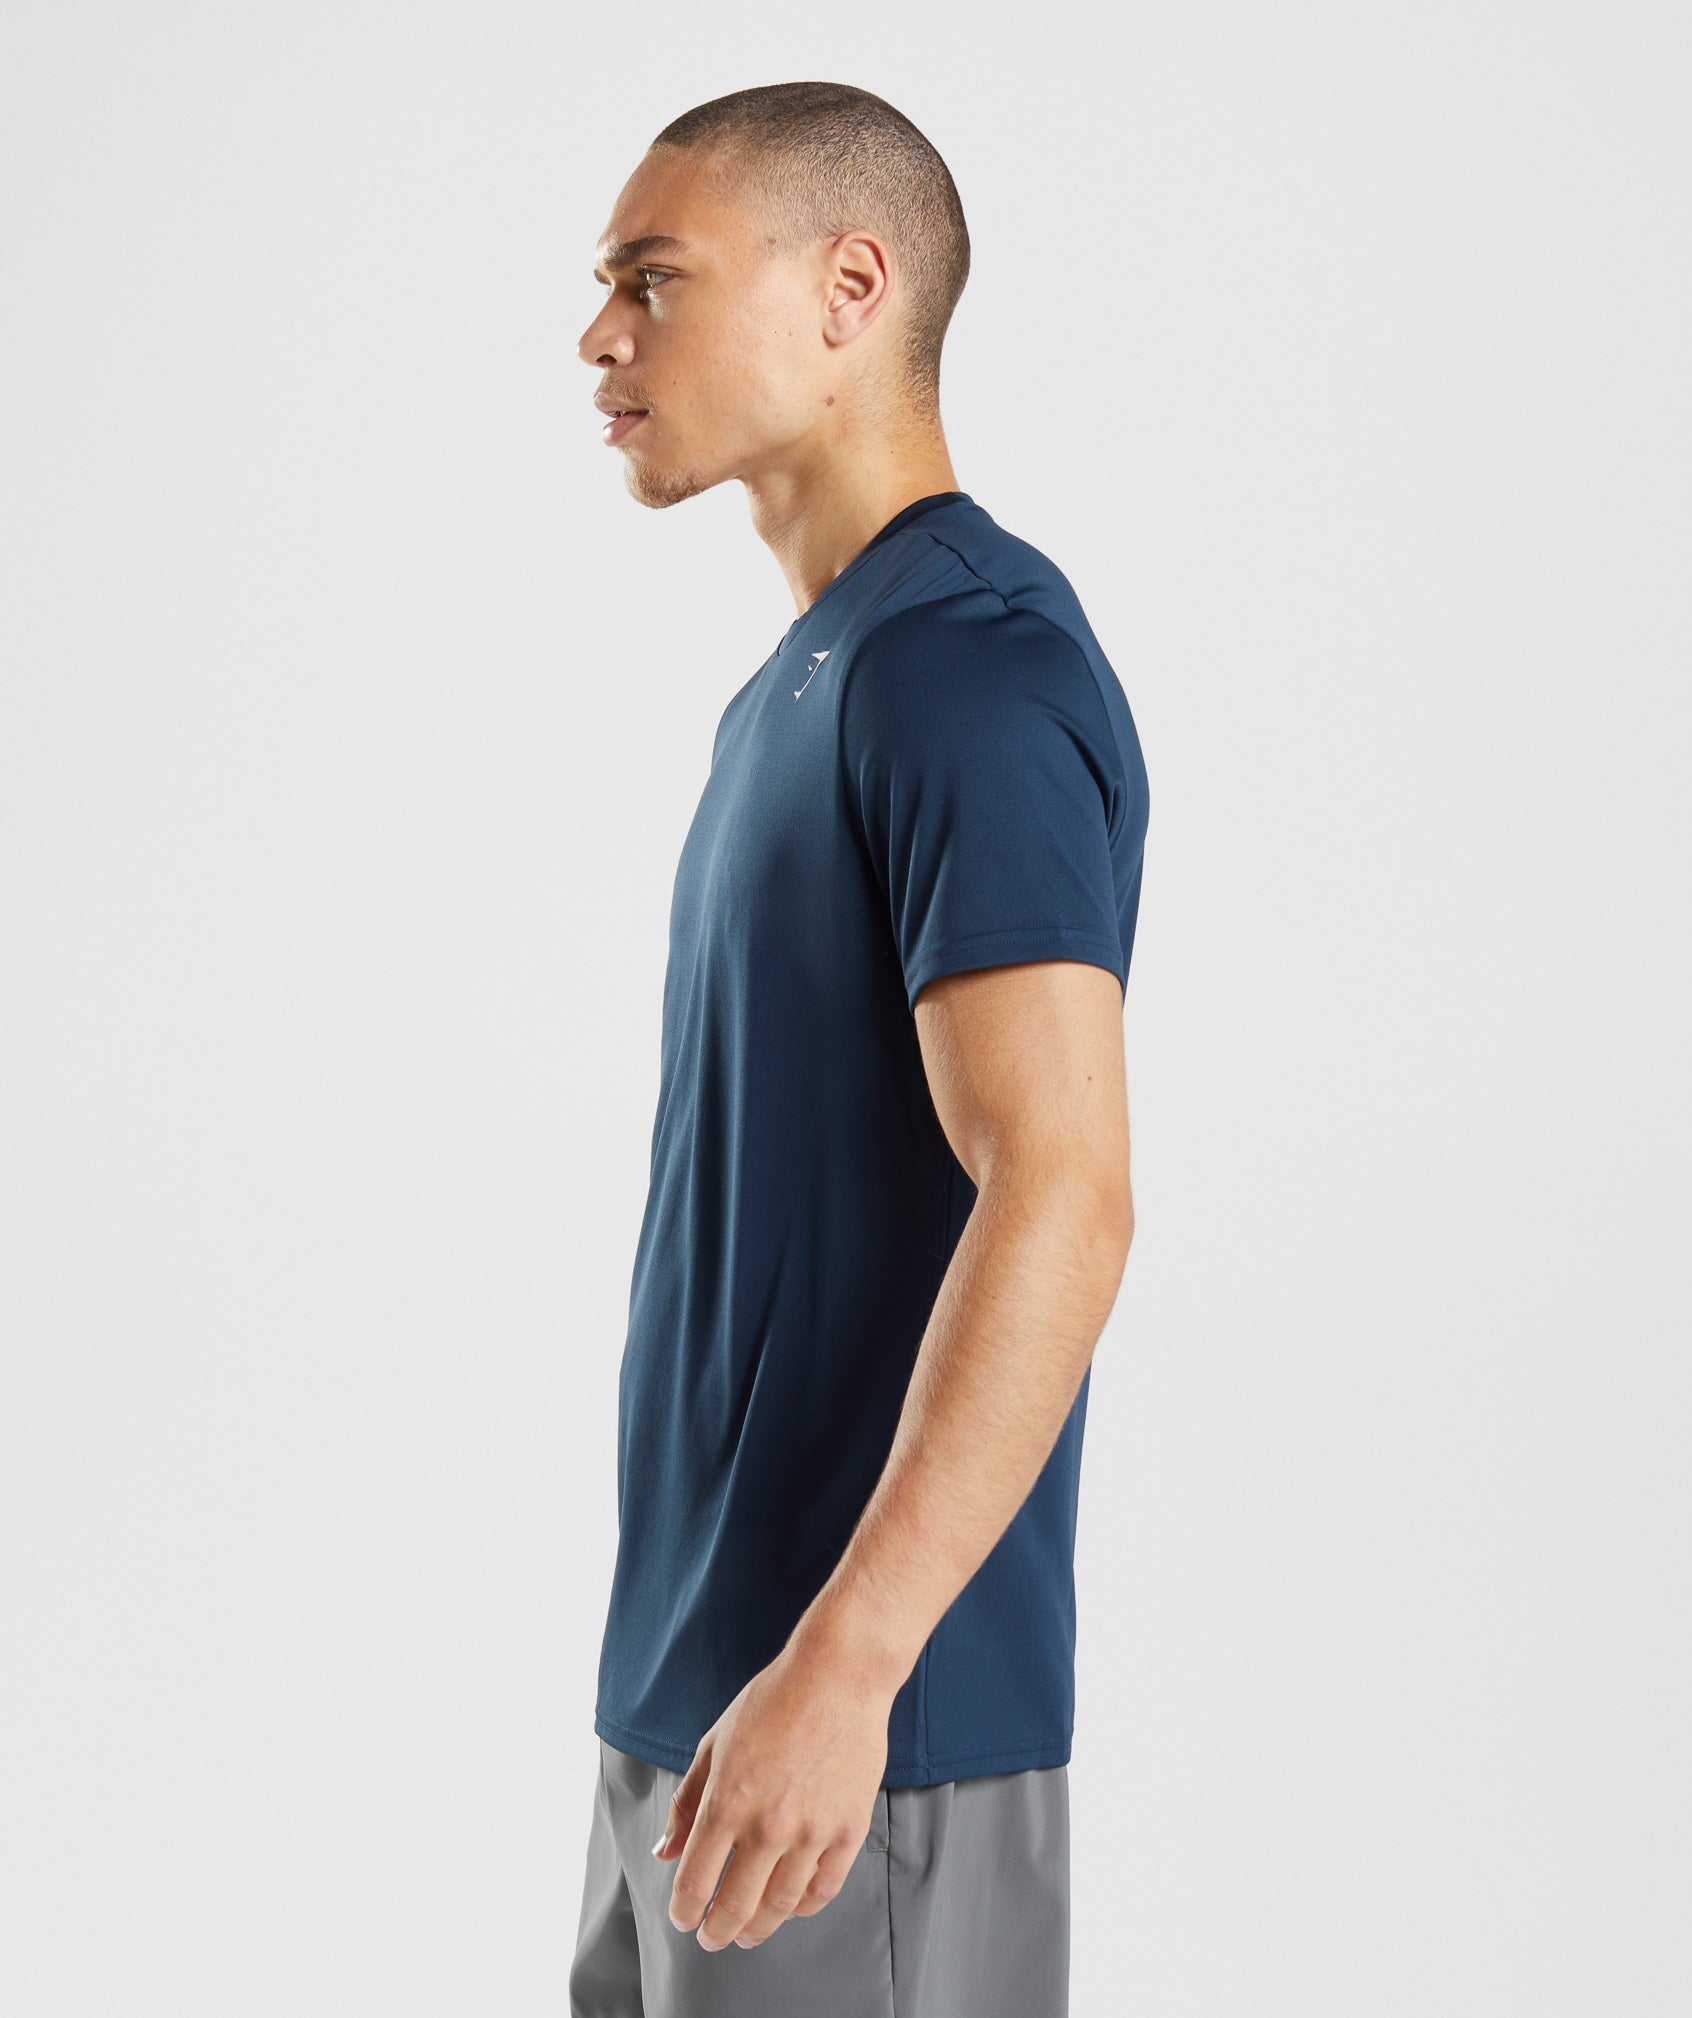 Arrival T-Shirt in Navy - view 3